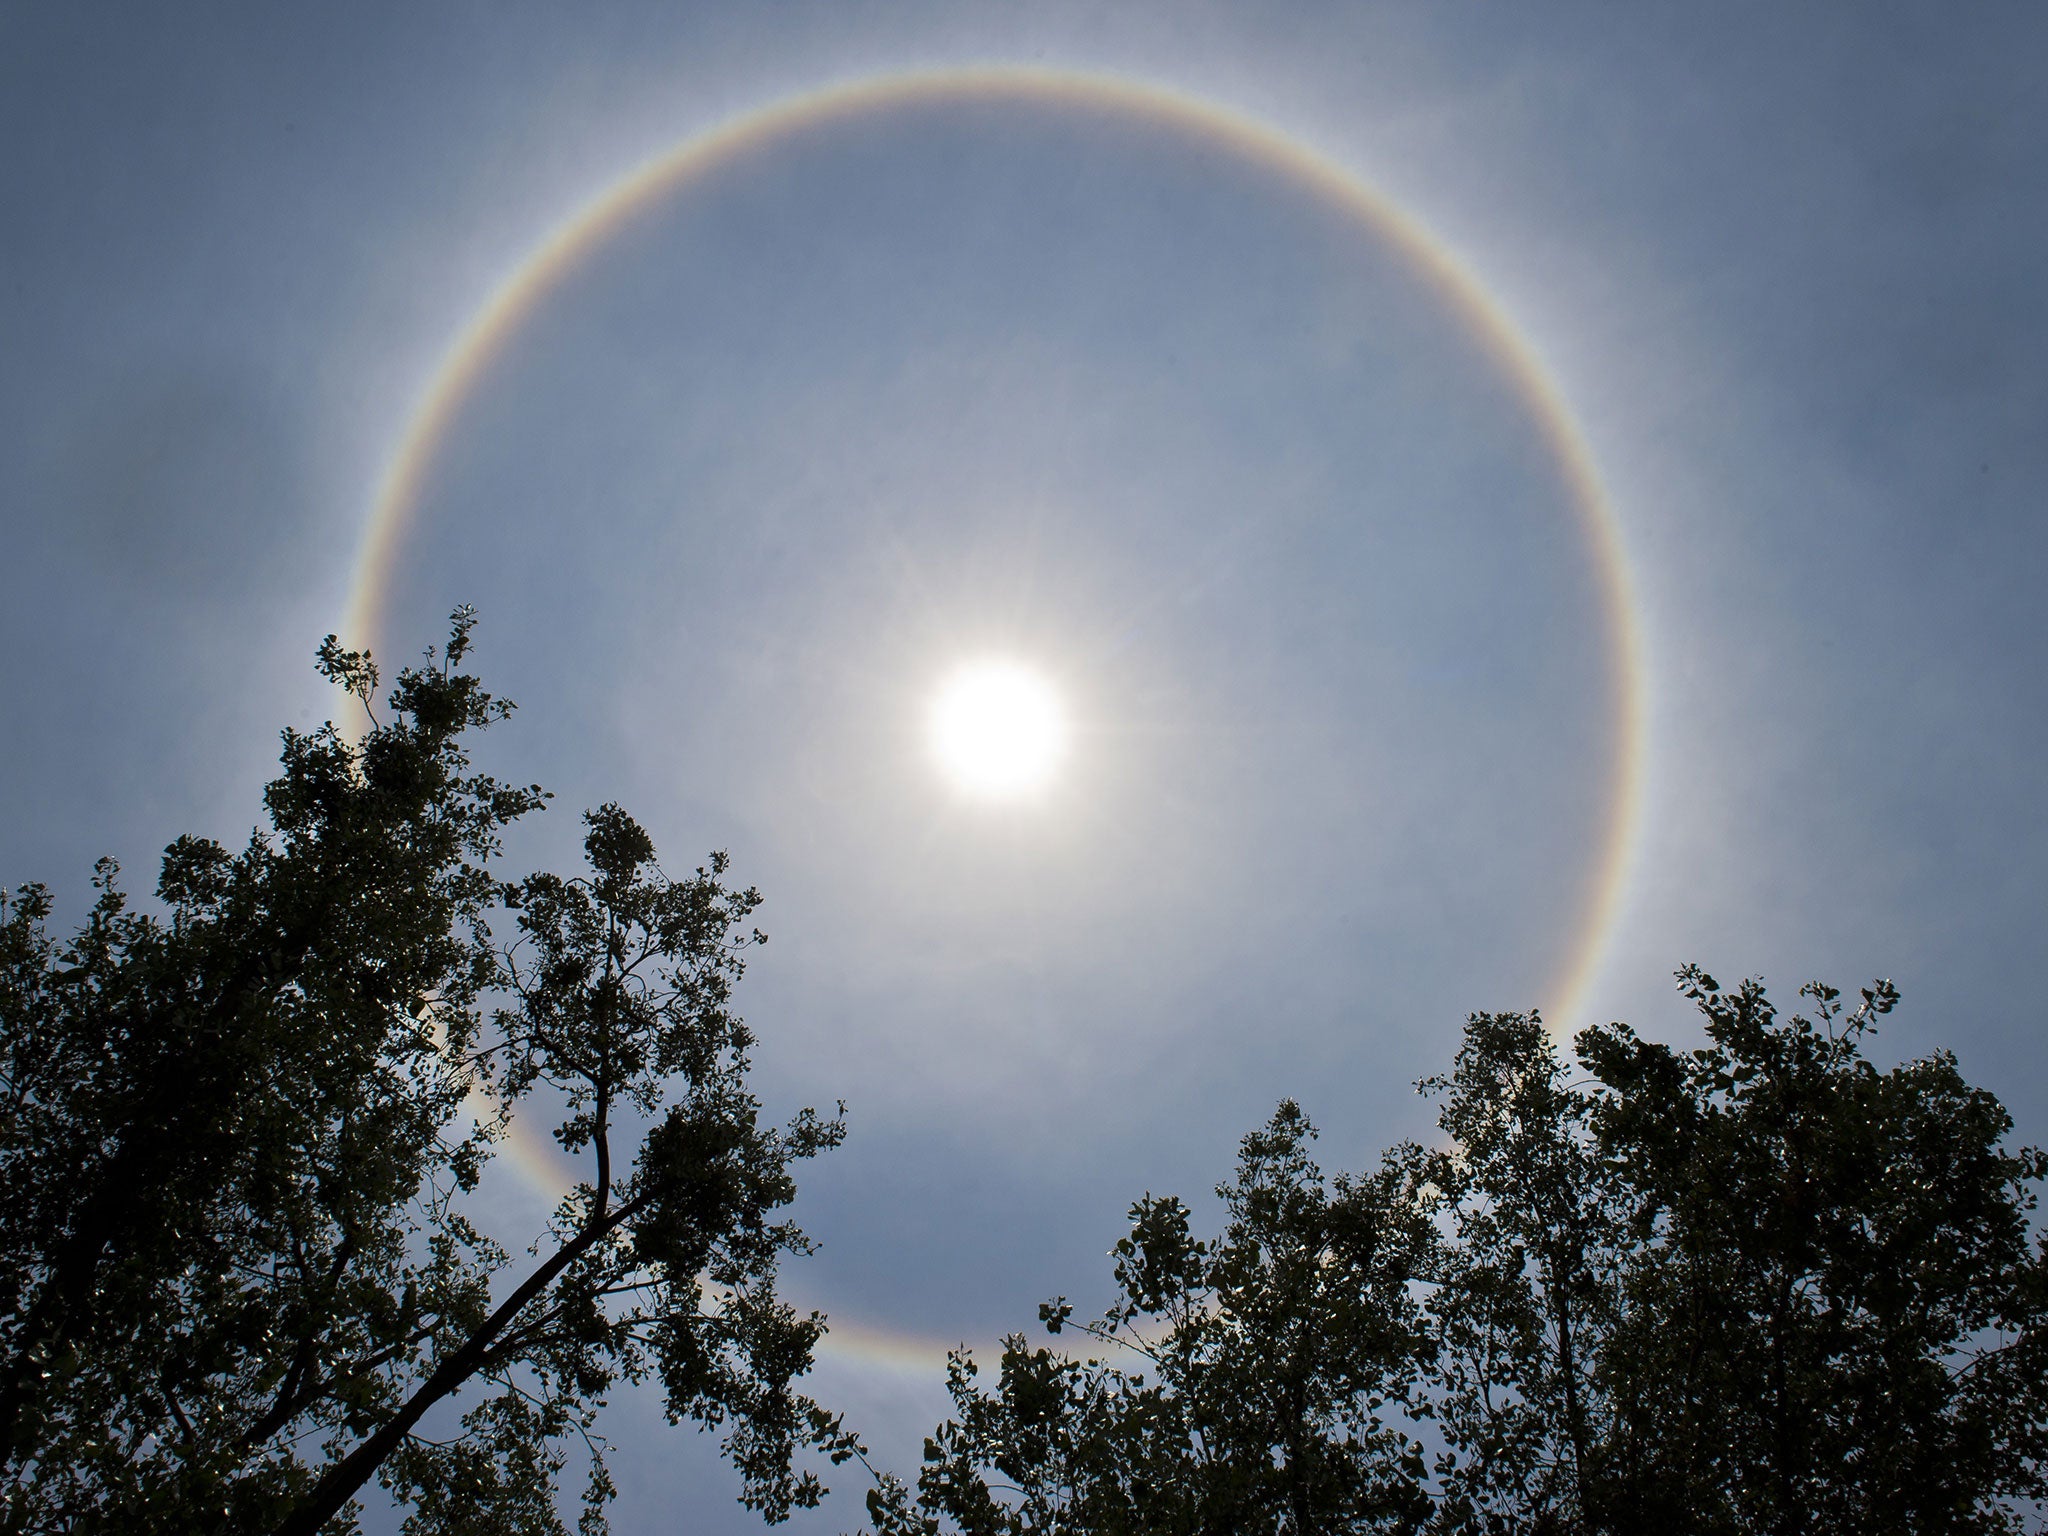 The 'sun halo' appeared in the sky above Mexico on Thursday